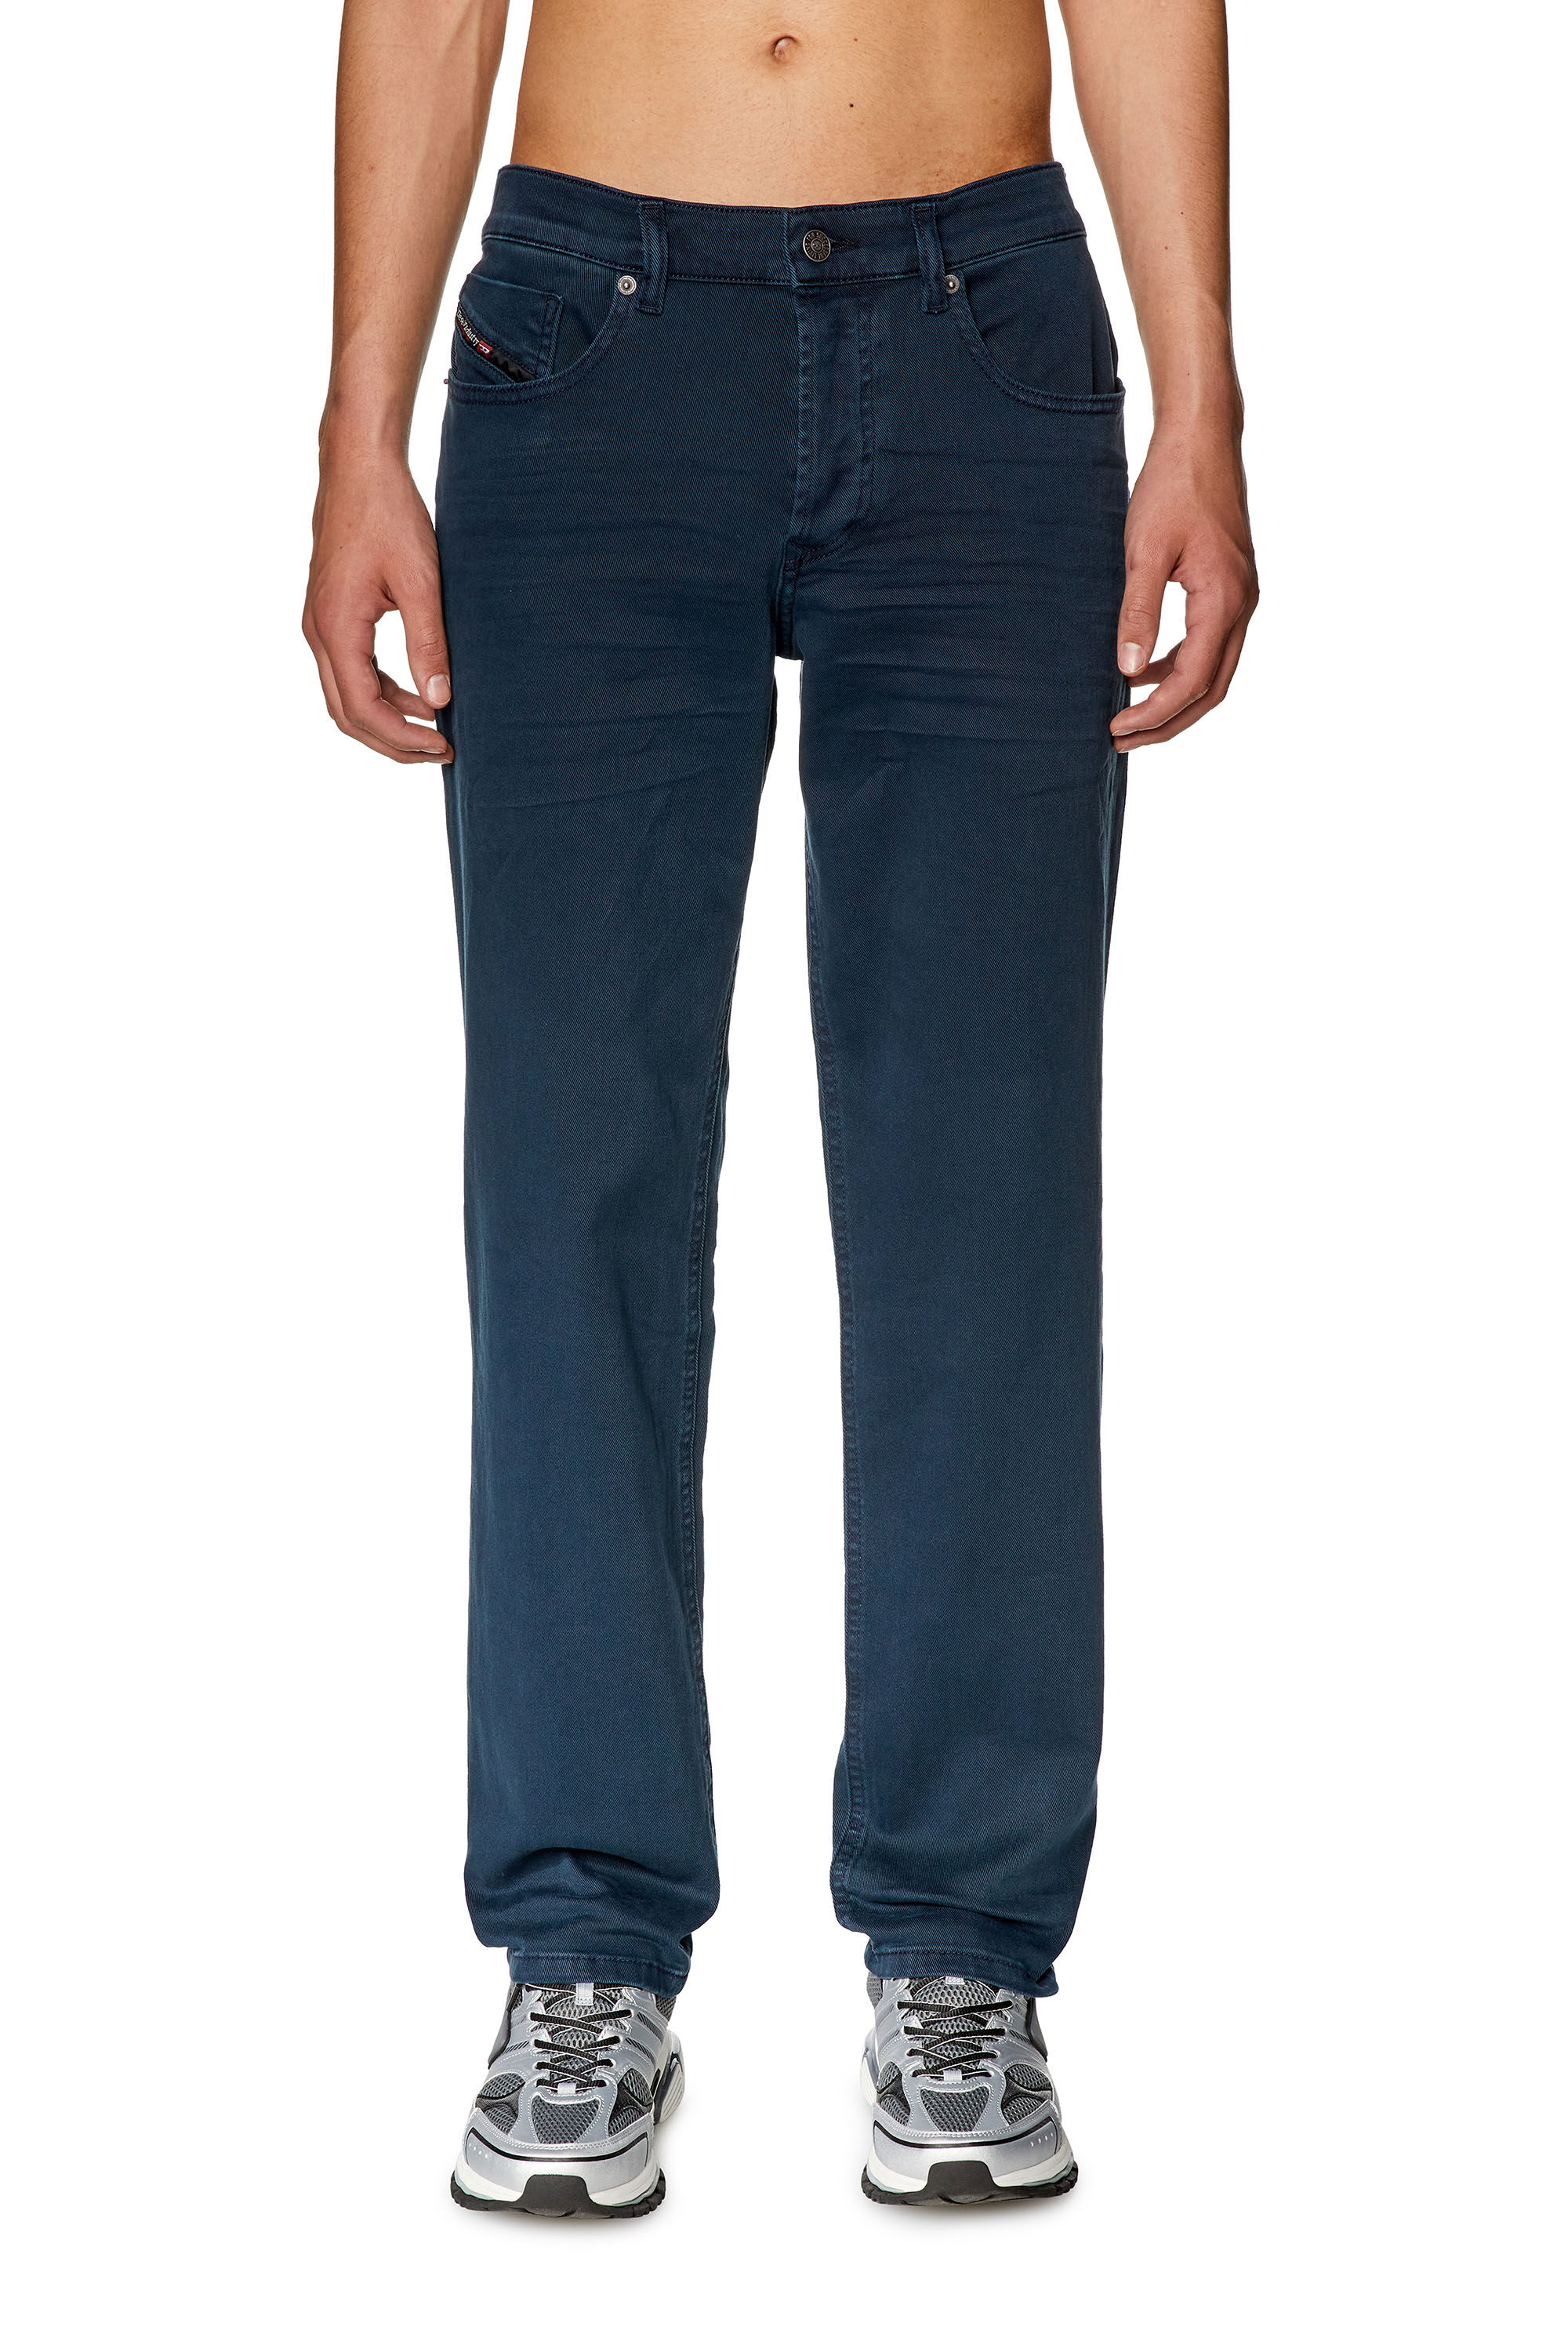 Men's Tapered Jeans, Colored